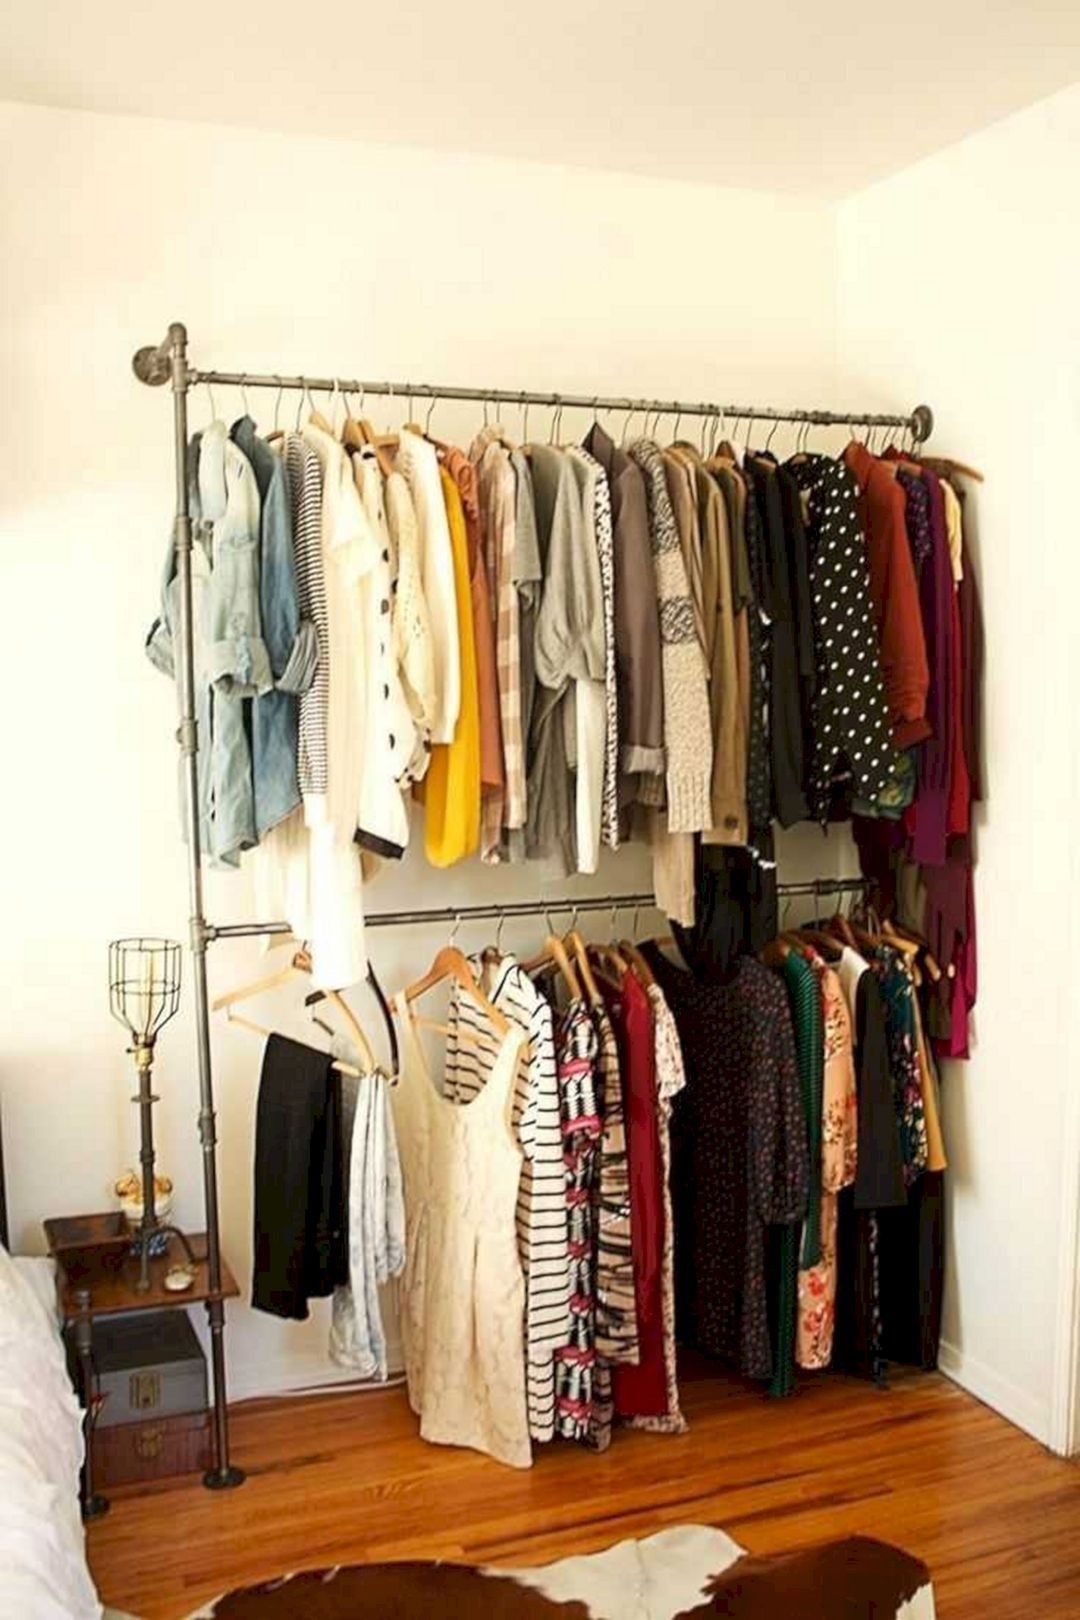 Wardrobe armoire for hanging clothes